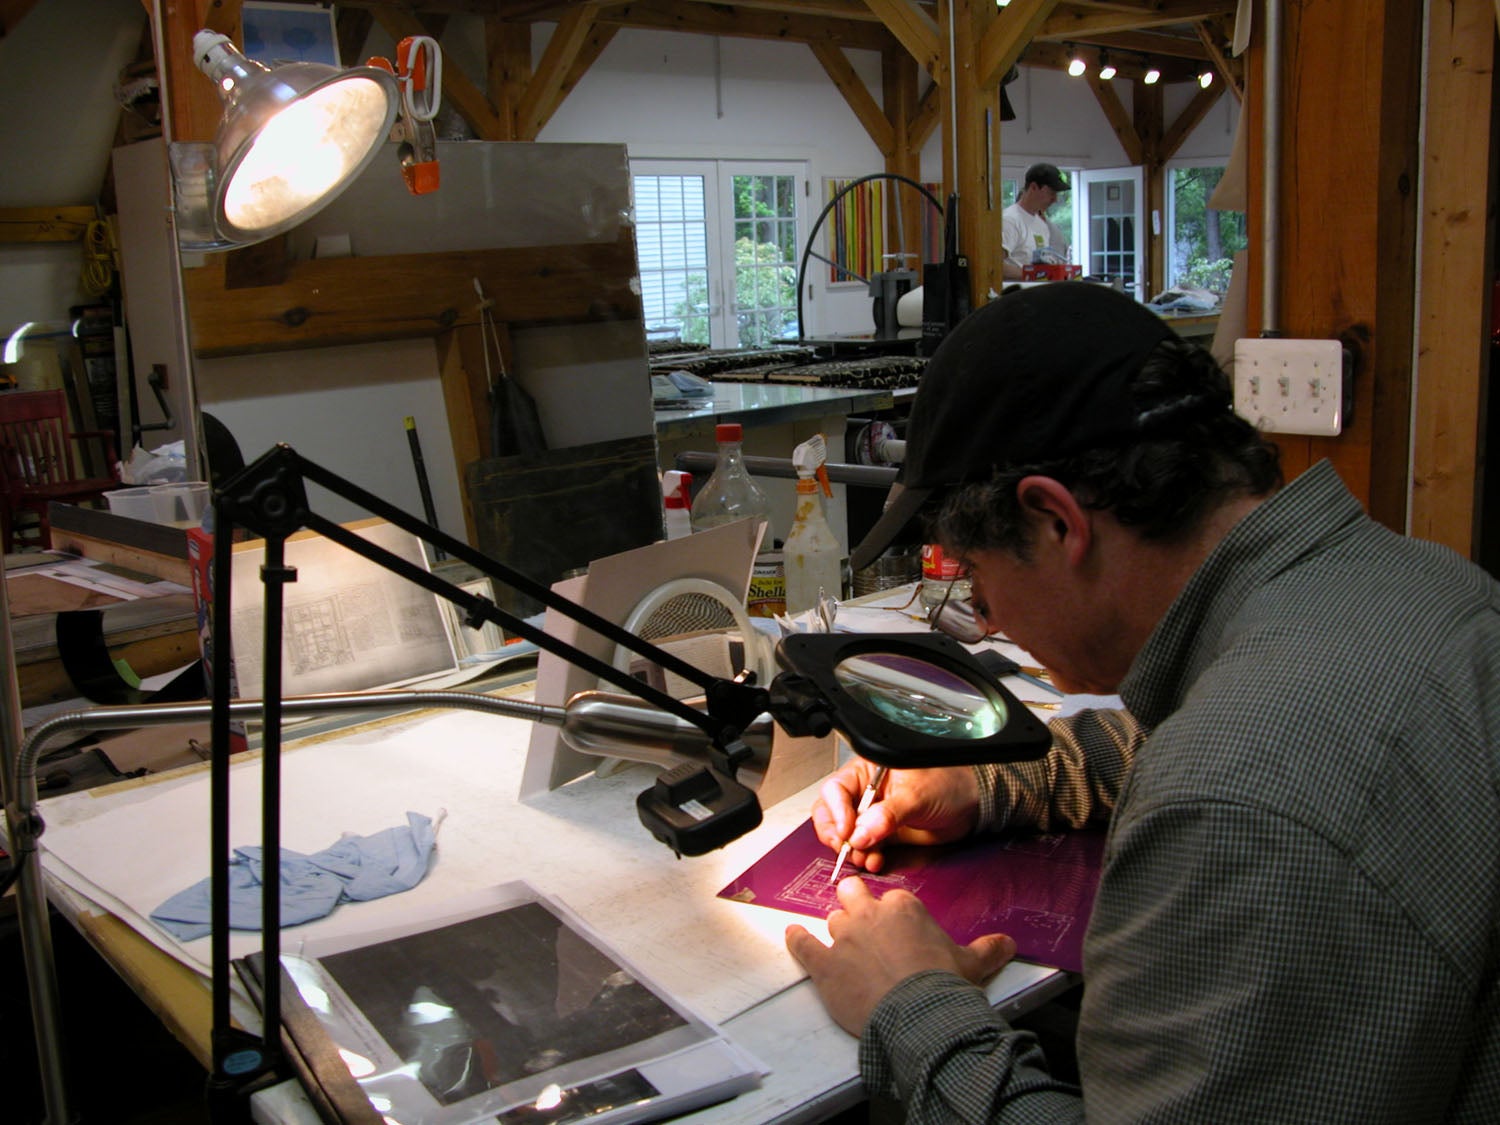 Photograph of the Artist at Work, Center Street Studio image